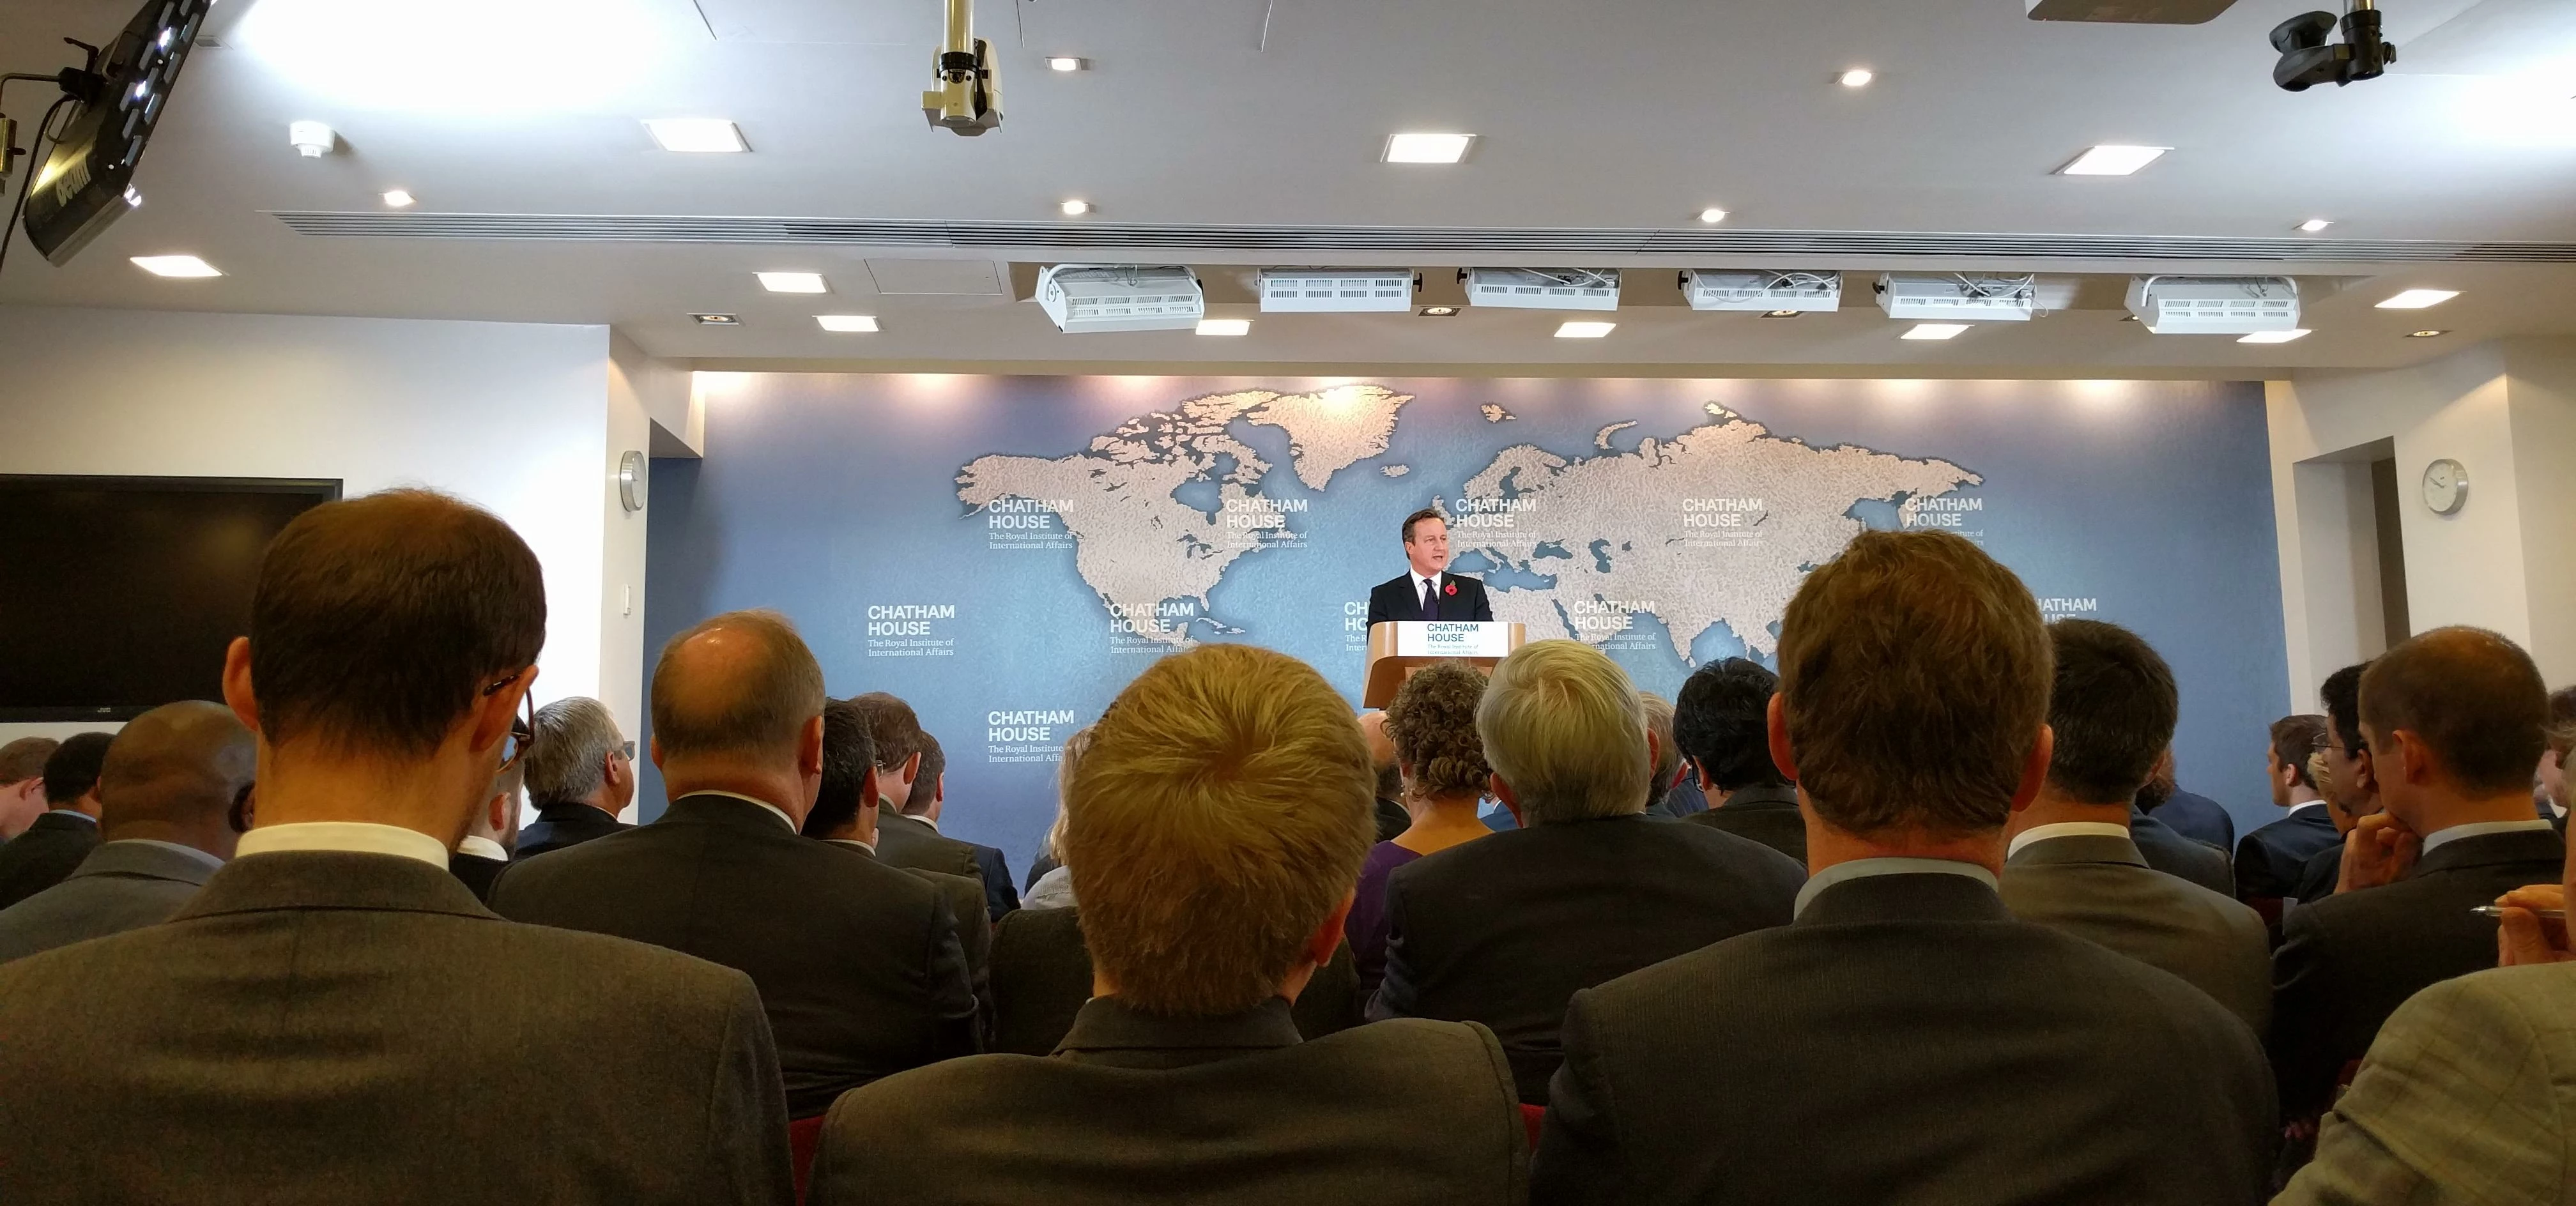 Prime Minister David Cameron speaking at Chatham House